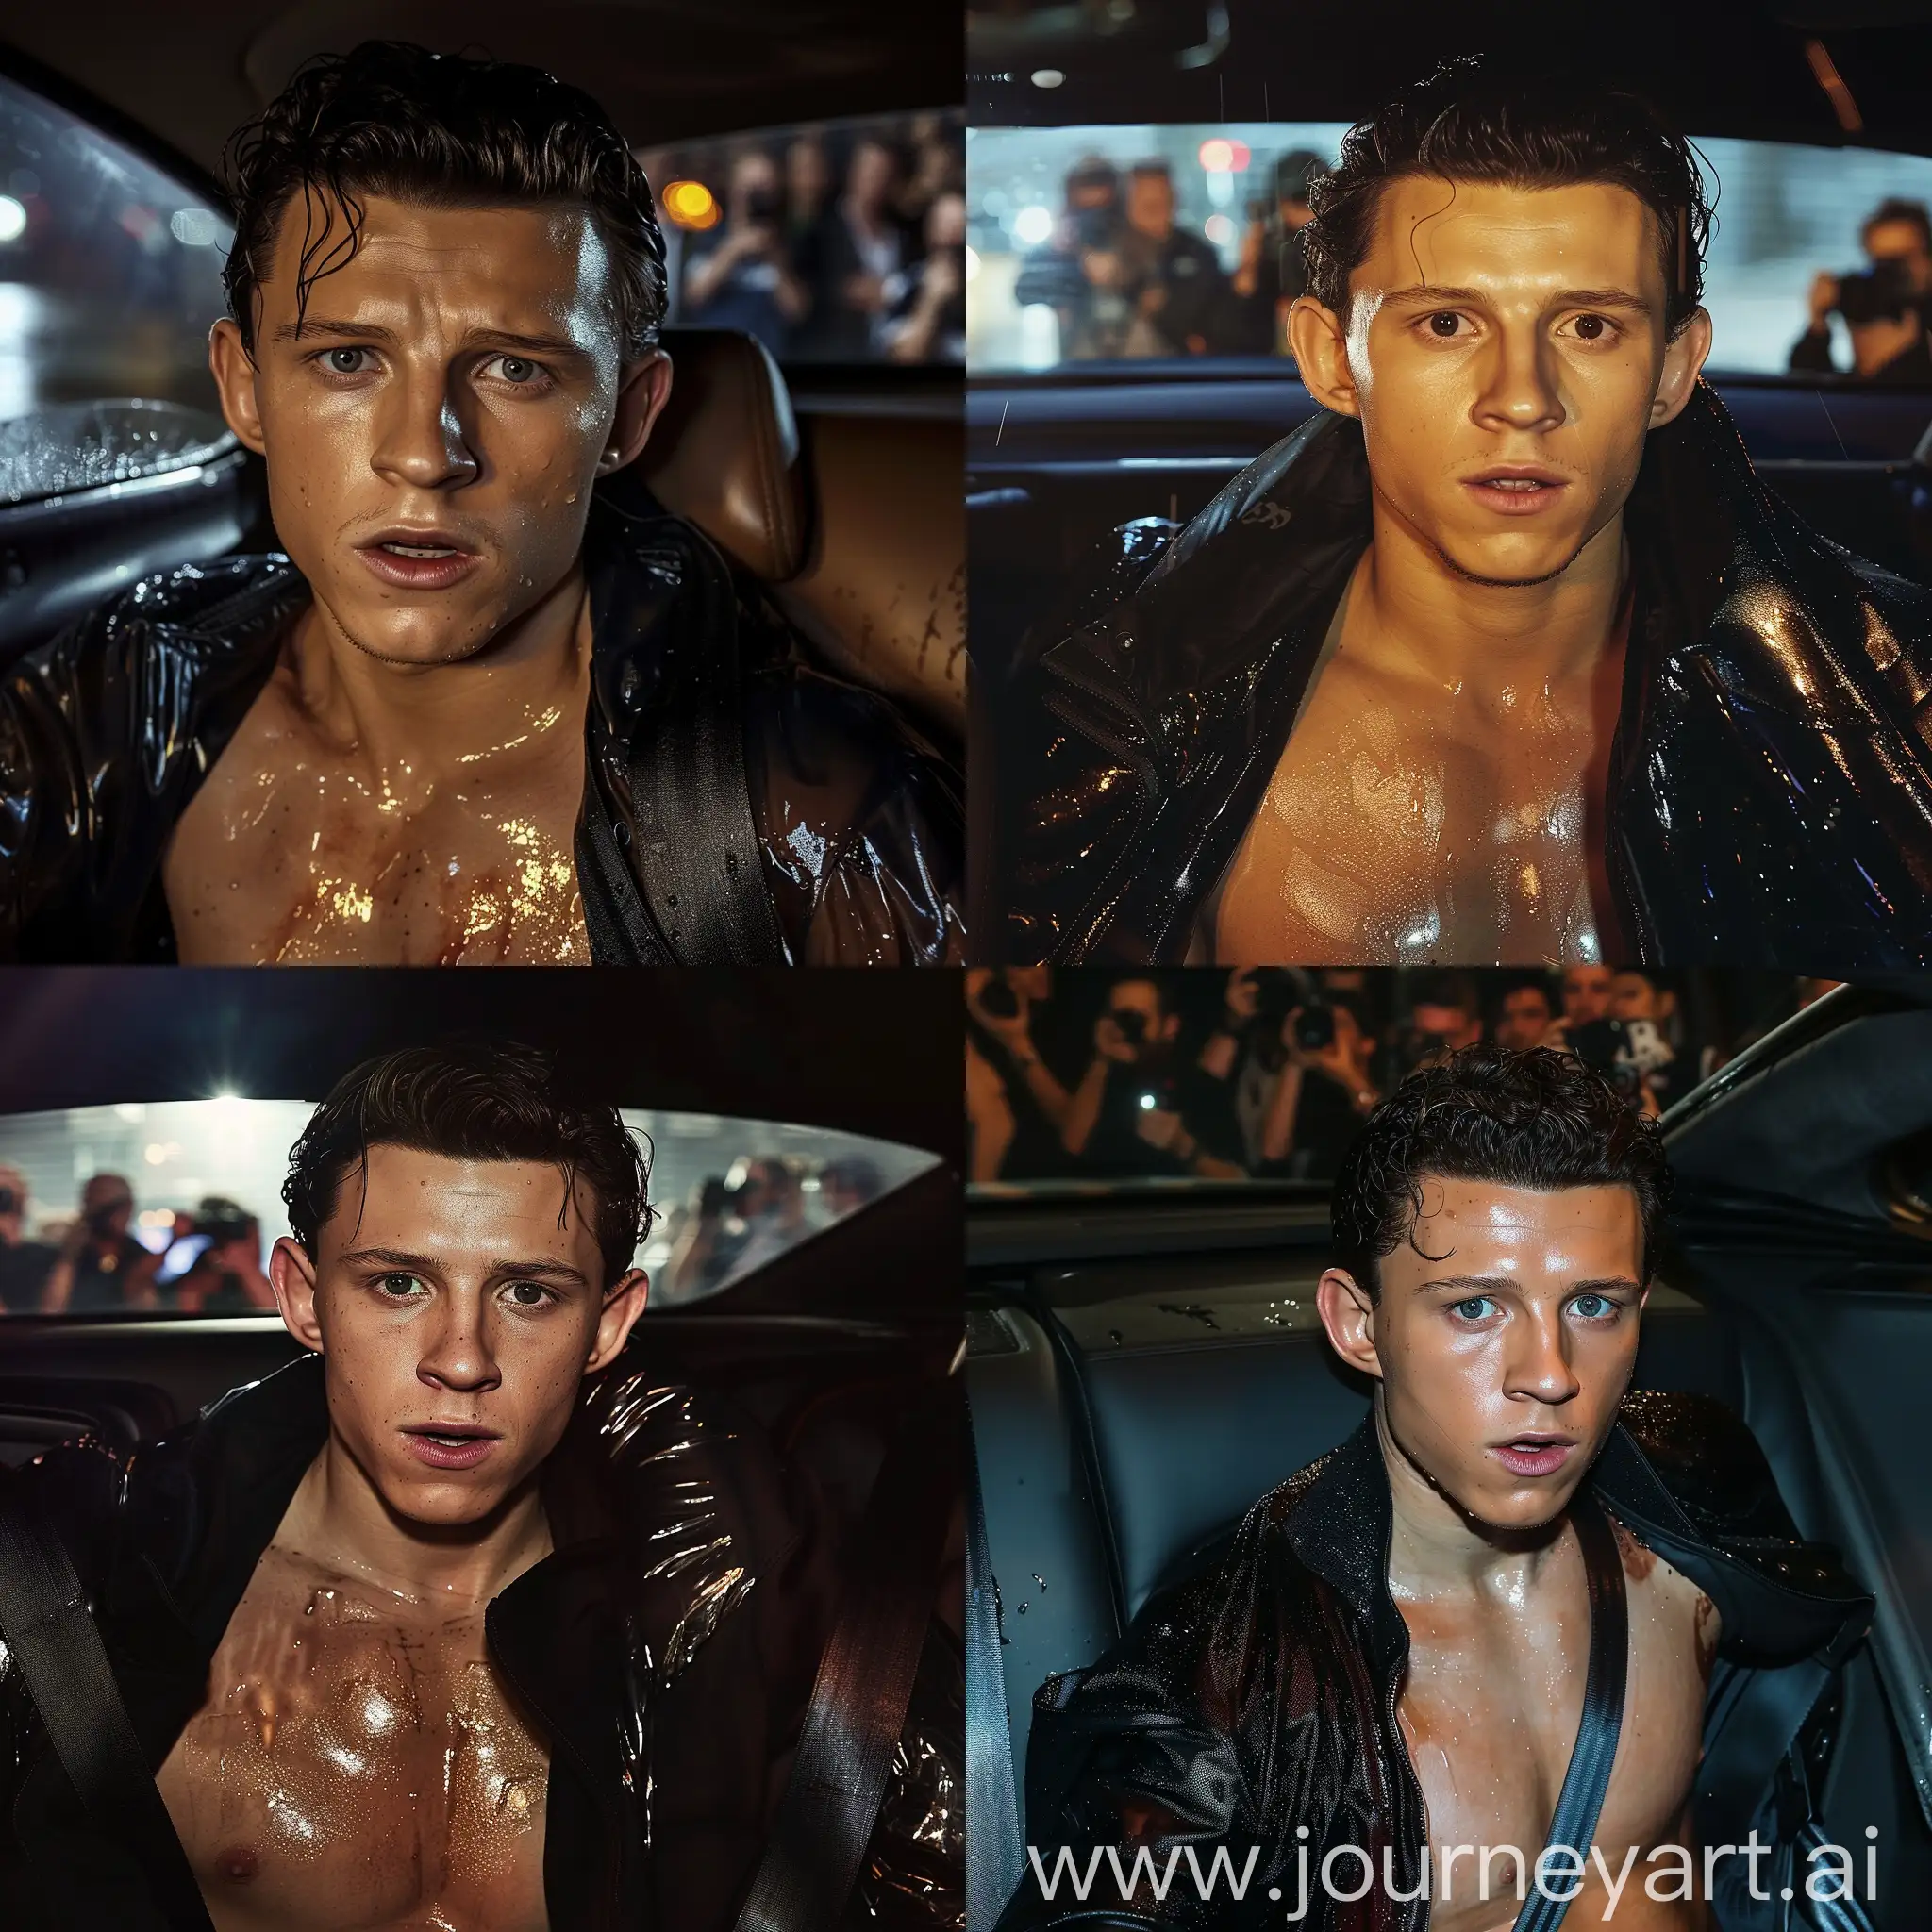 Movie lighting, actor Tom Holland's handsome face, a fit and handsome man in the back seat of the car, wearing an open black jacket, clean and smooth skin, fit masculine torso and abdomen, handsome Tom Holland inside a car, low lighting, sweaty shiny skin, wet sweaty hair, low angle, blurred background paparazzi outside the car